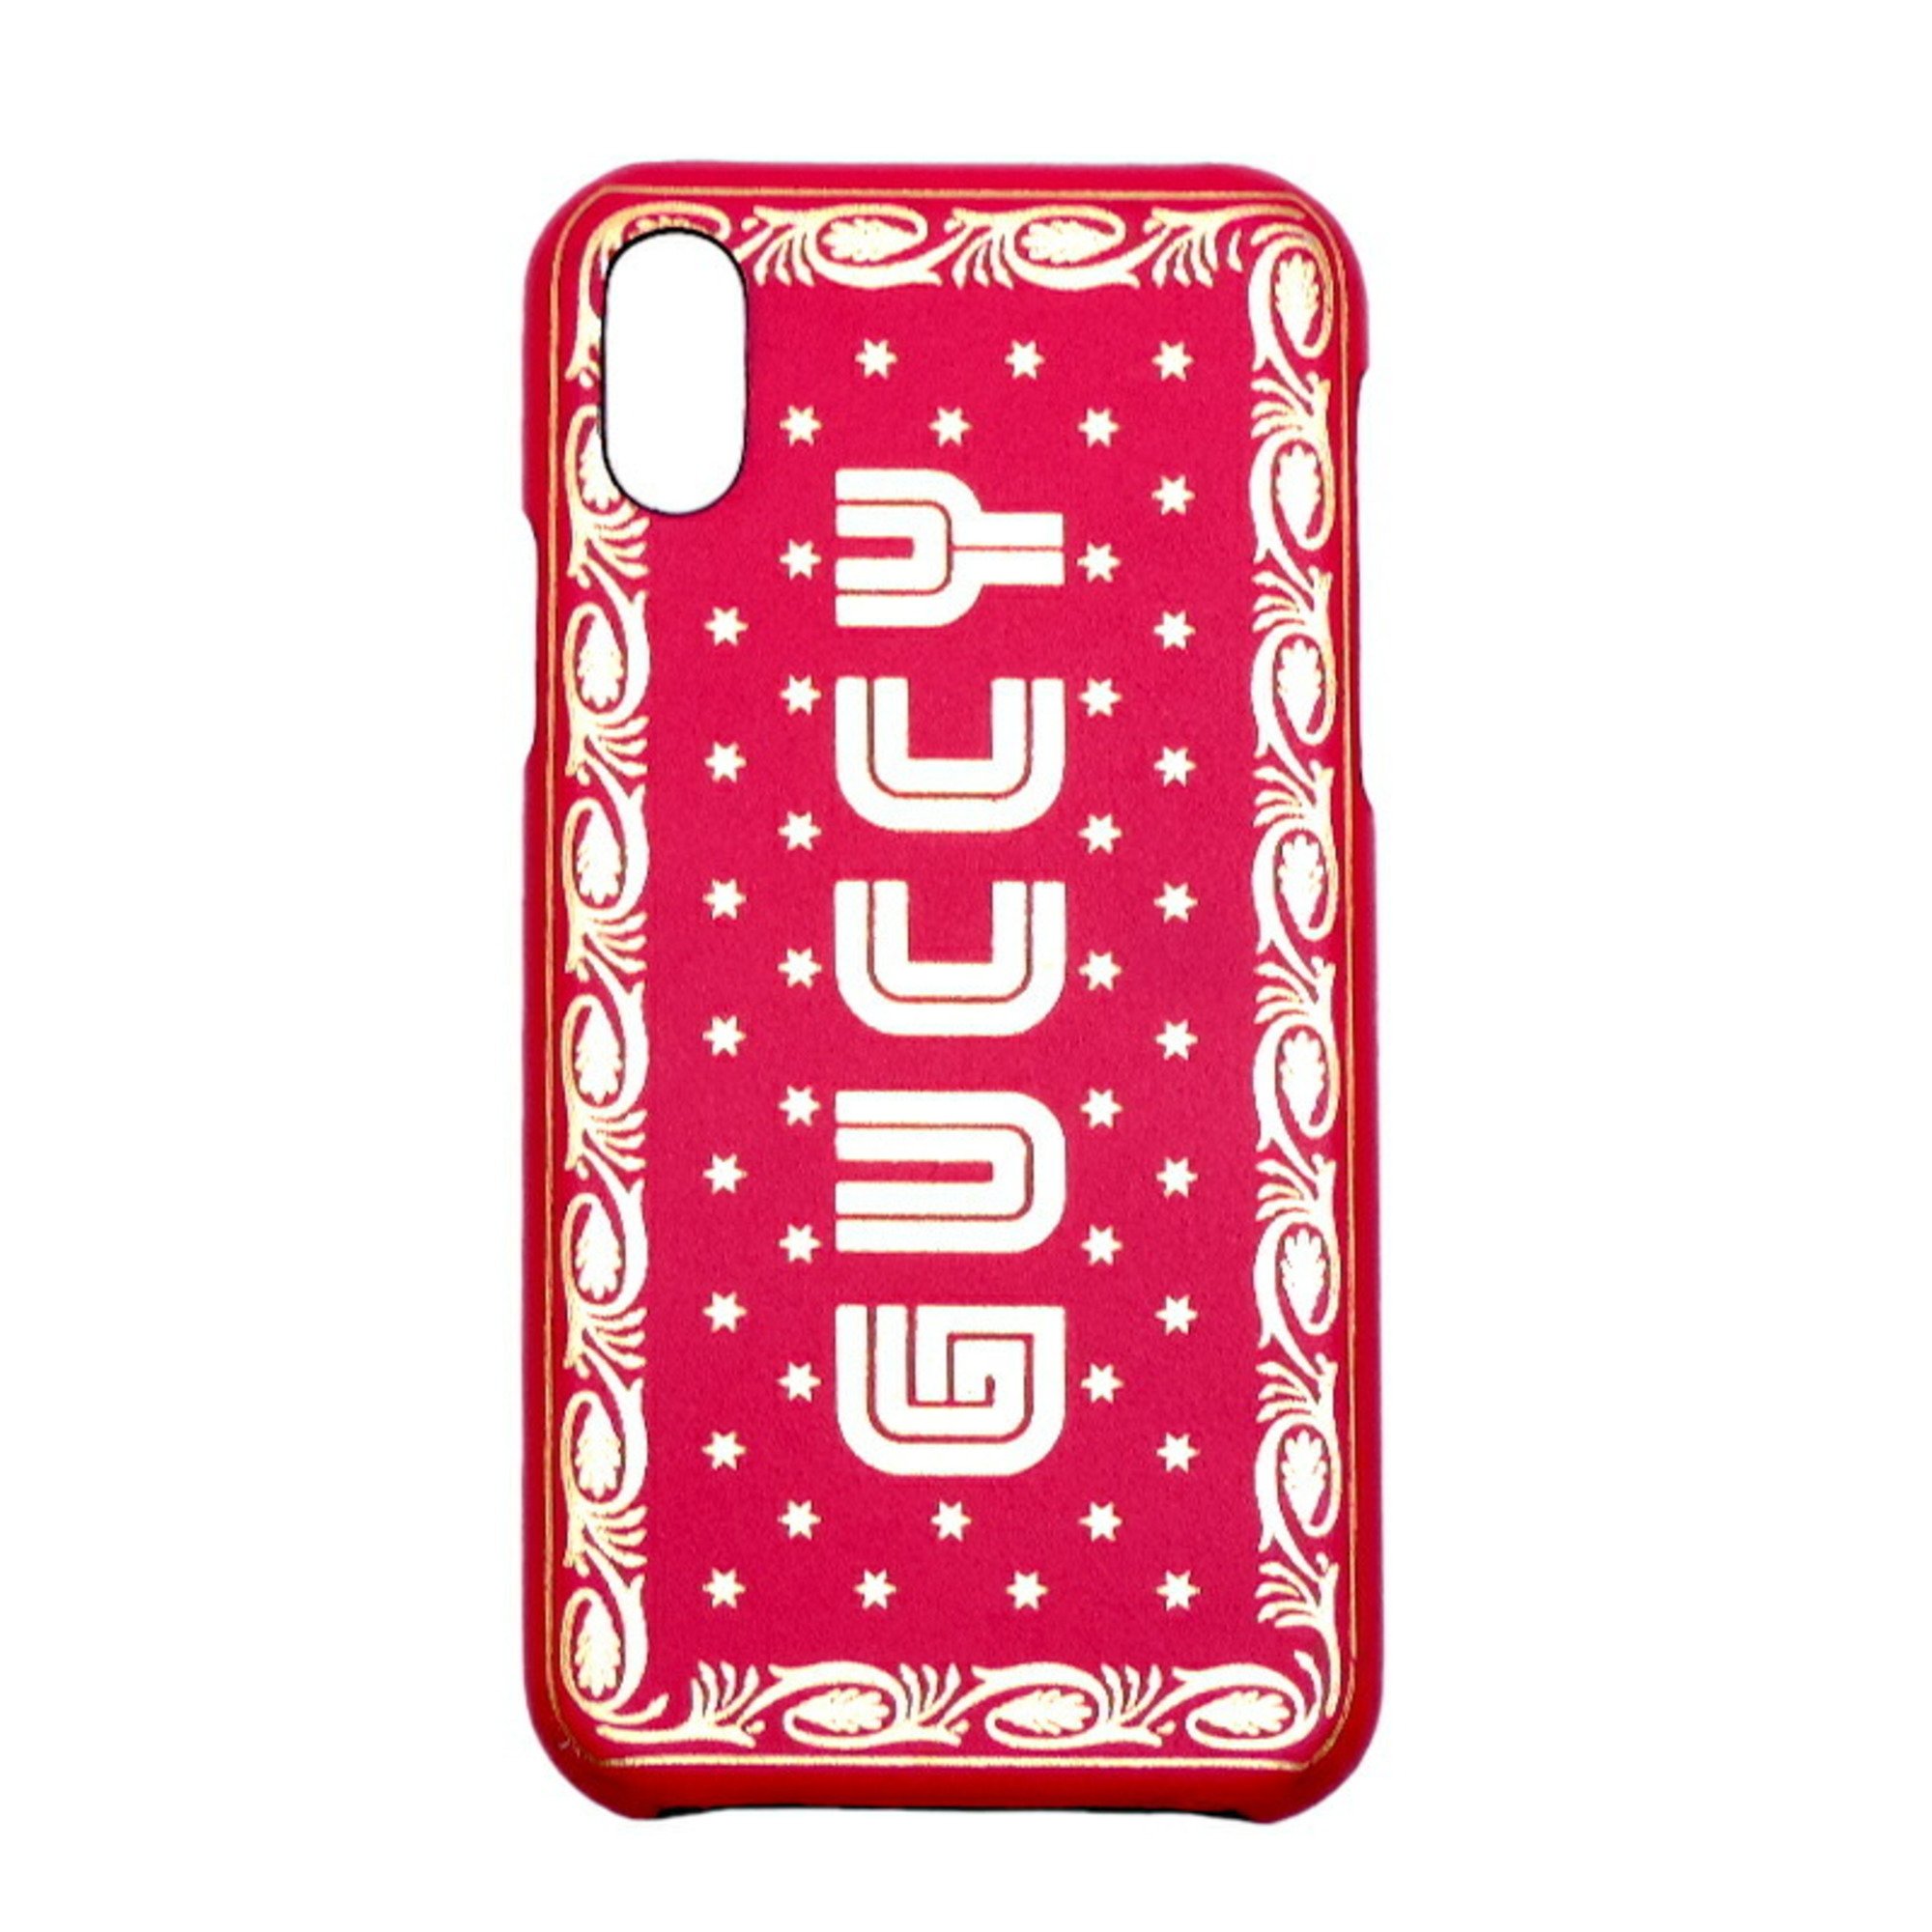 Gucci GUCCY Print iPhoneX/Xs Case Women's/Men's Cell Phone/Smartphone 524976 Leather Pink/Gold